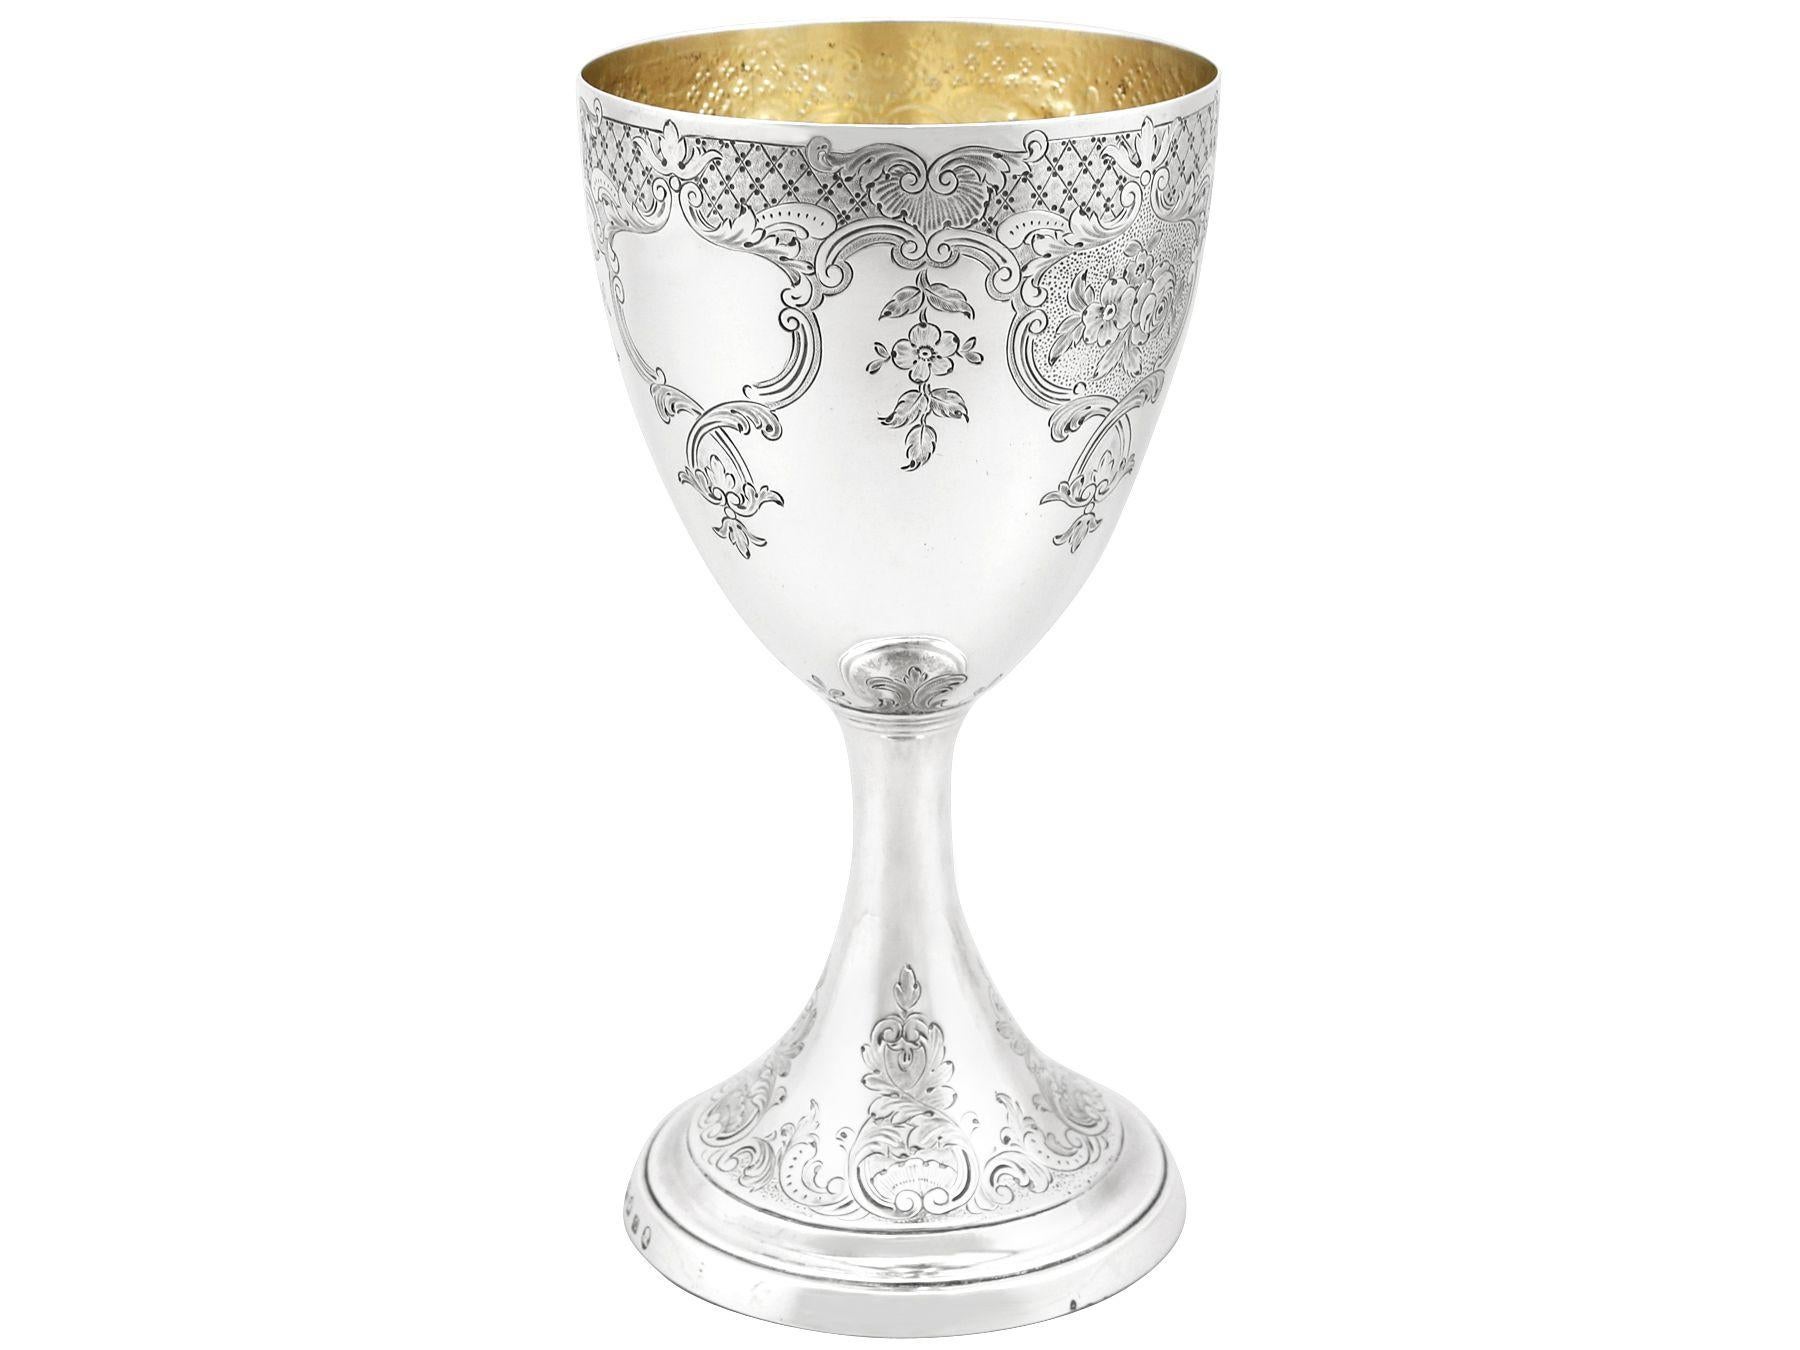 An exceptional, fine and impressive antique George III English sterling silver wine goblet; an addition to our Georgian wine and drinks related silverware collection.

This exceptional antique Georgian sterling silver wine goblet has a plain